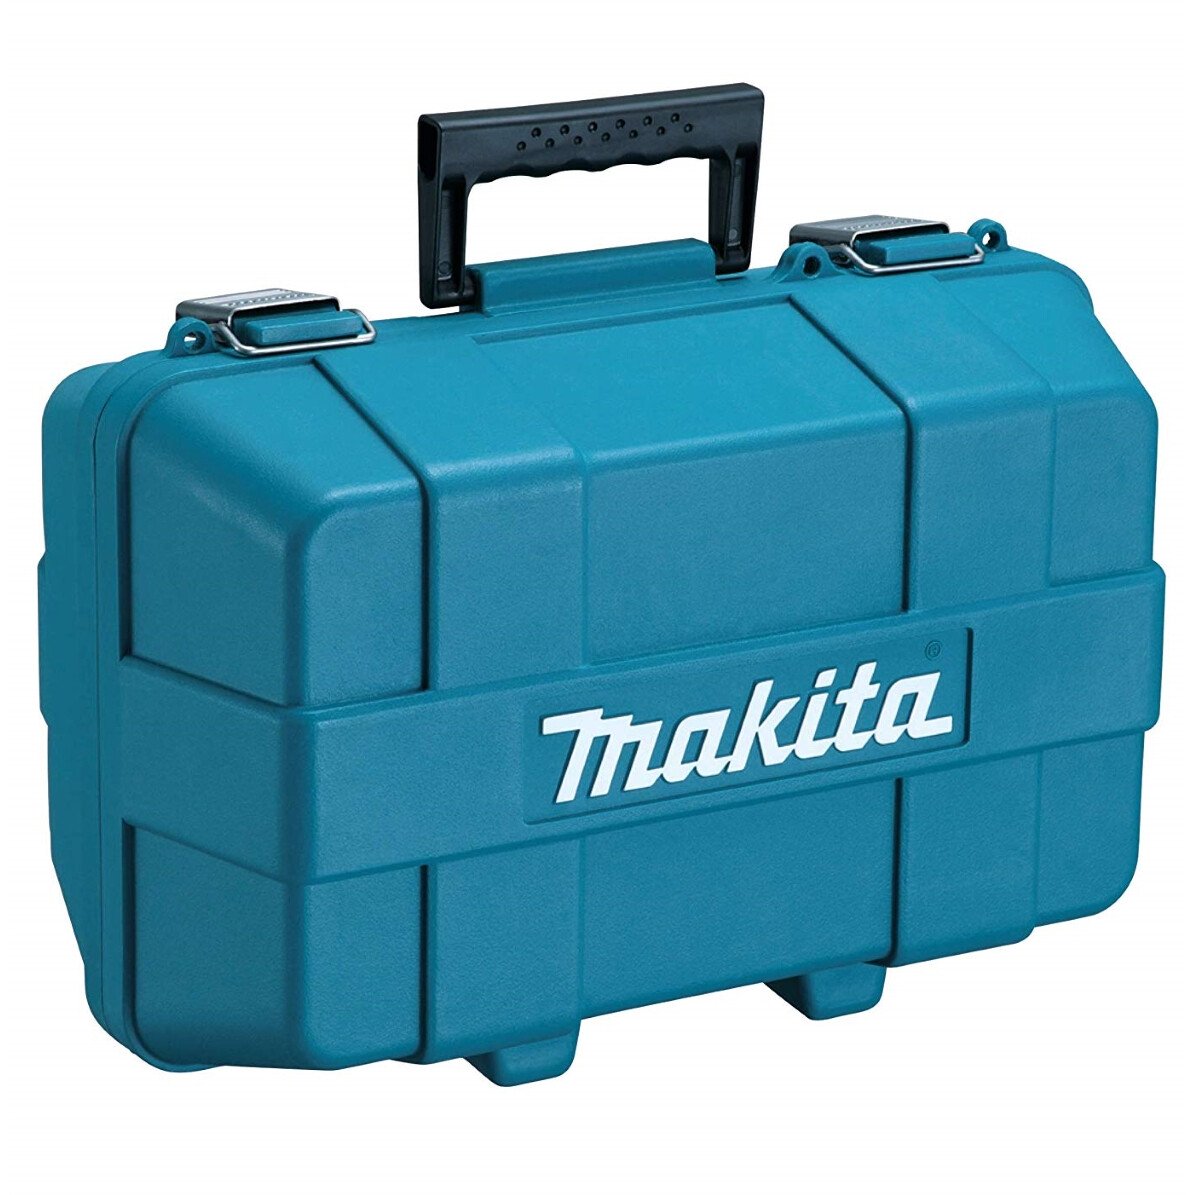 Makita 824892-1 Plastic Carry Case for KP0800